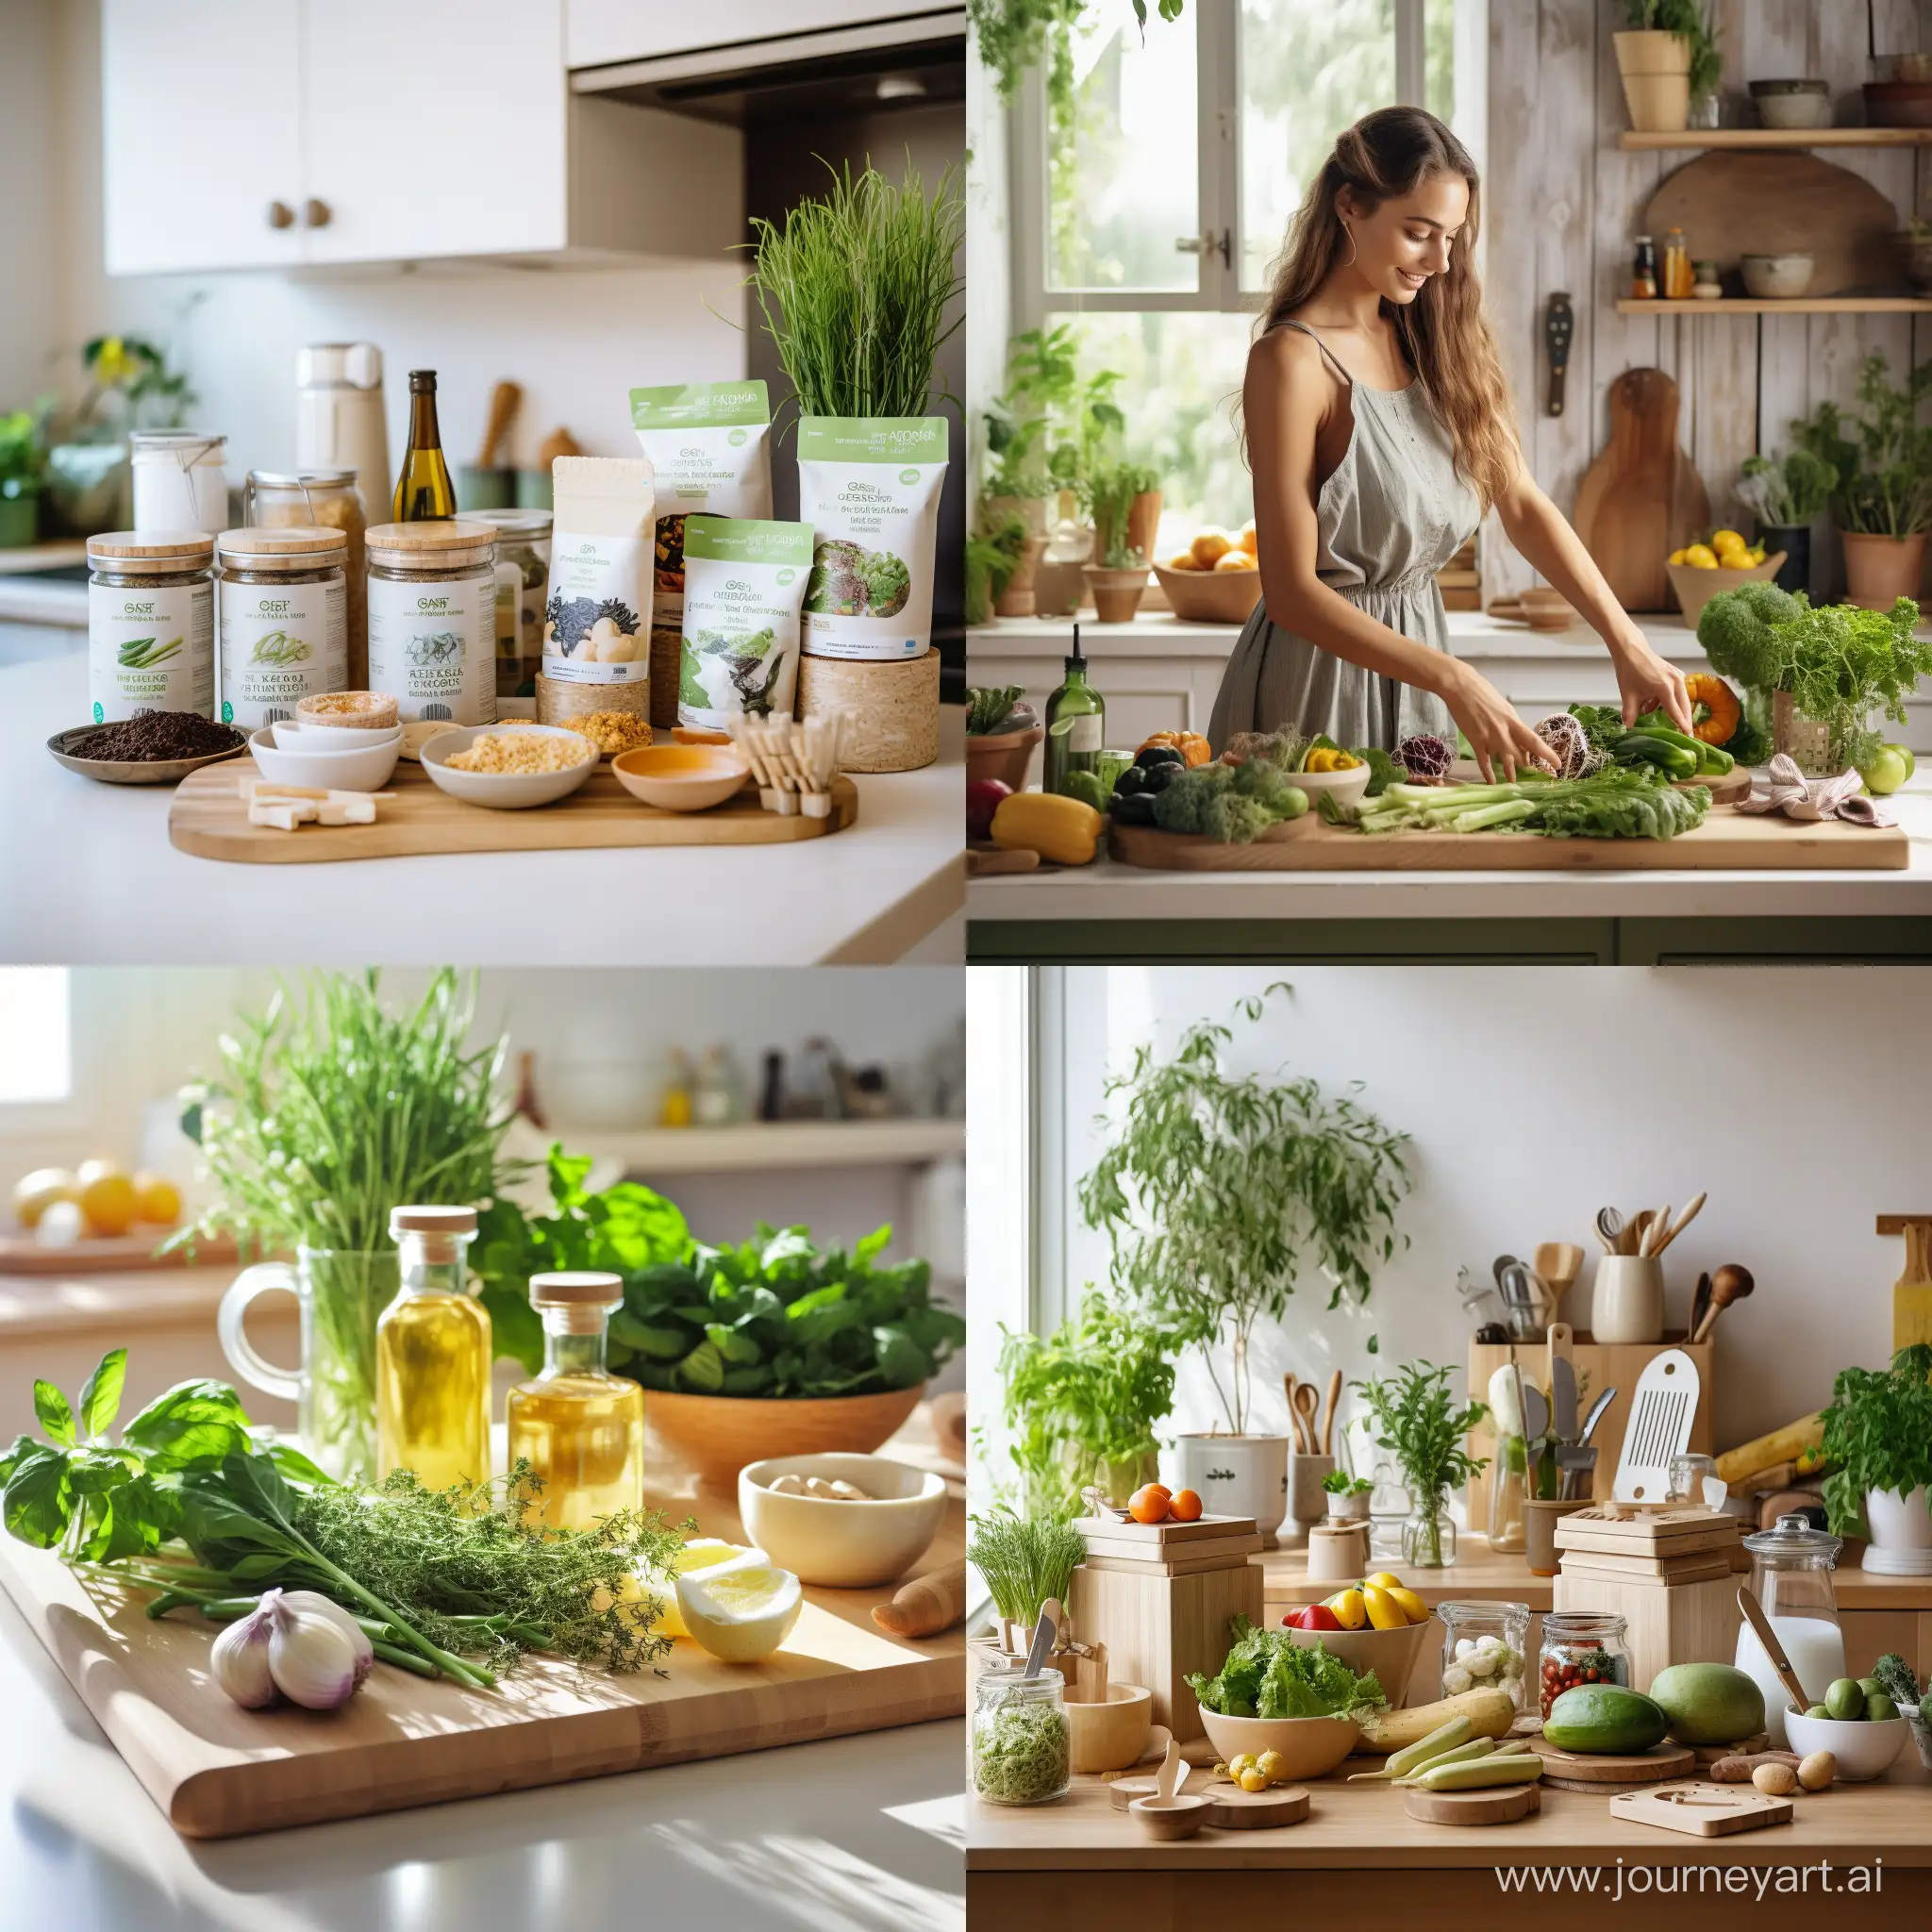 EcoFriendly-Kitchen-Products-Sustainable-Choices-for-a-Greener-Lifestyle